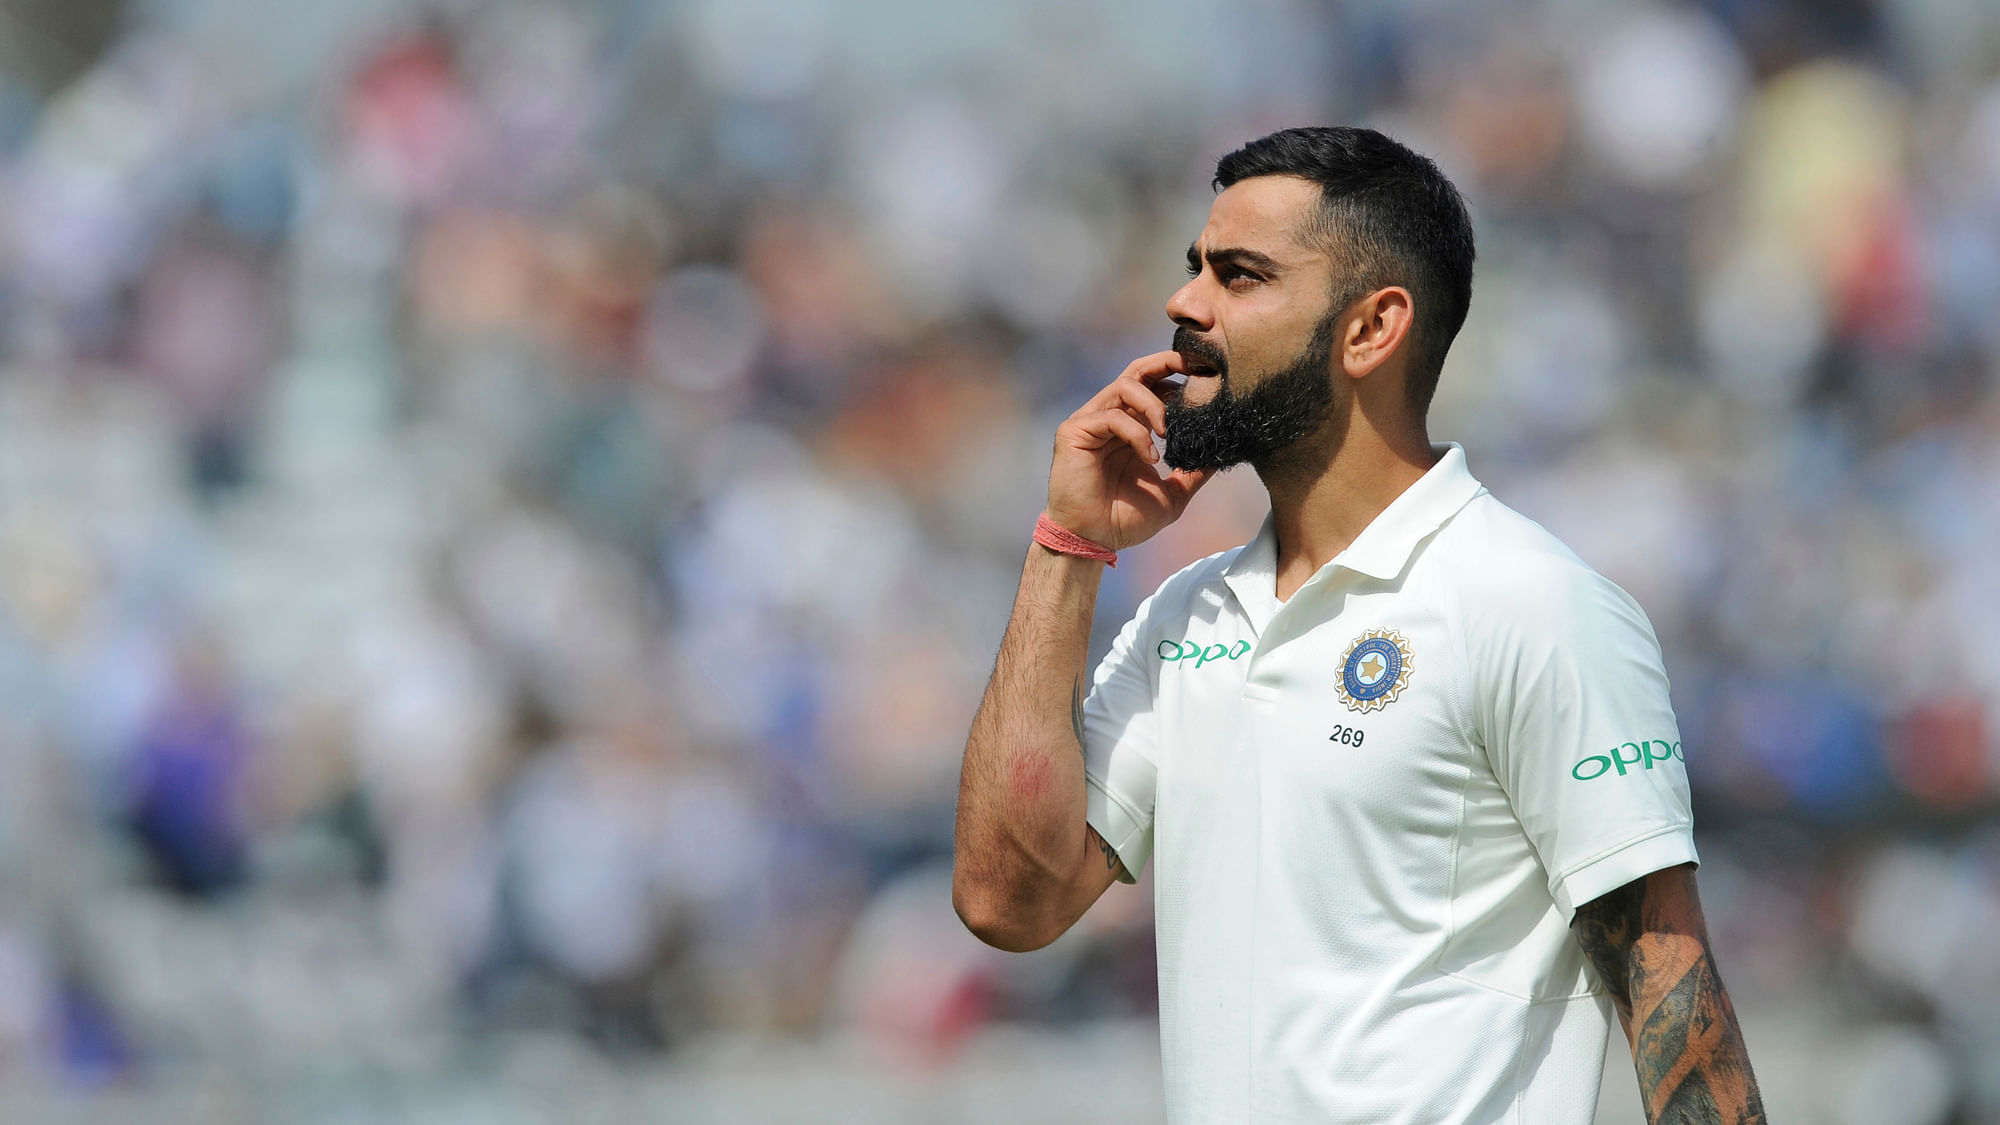 Virat Kohli’s Indian team lost the opening Test against England by 31 runs on Saturday.